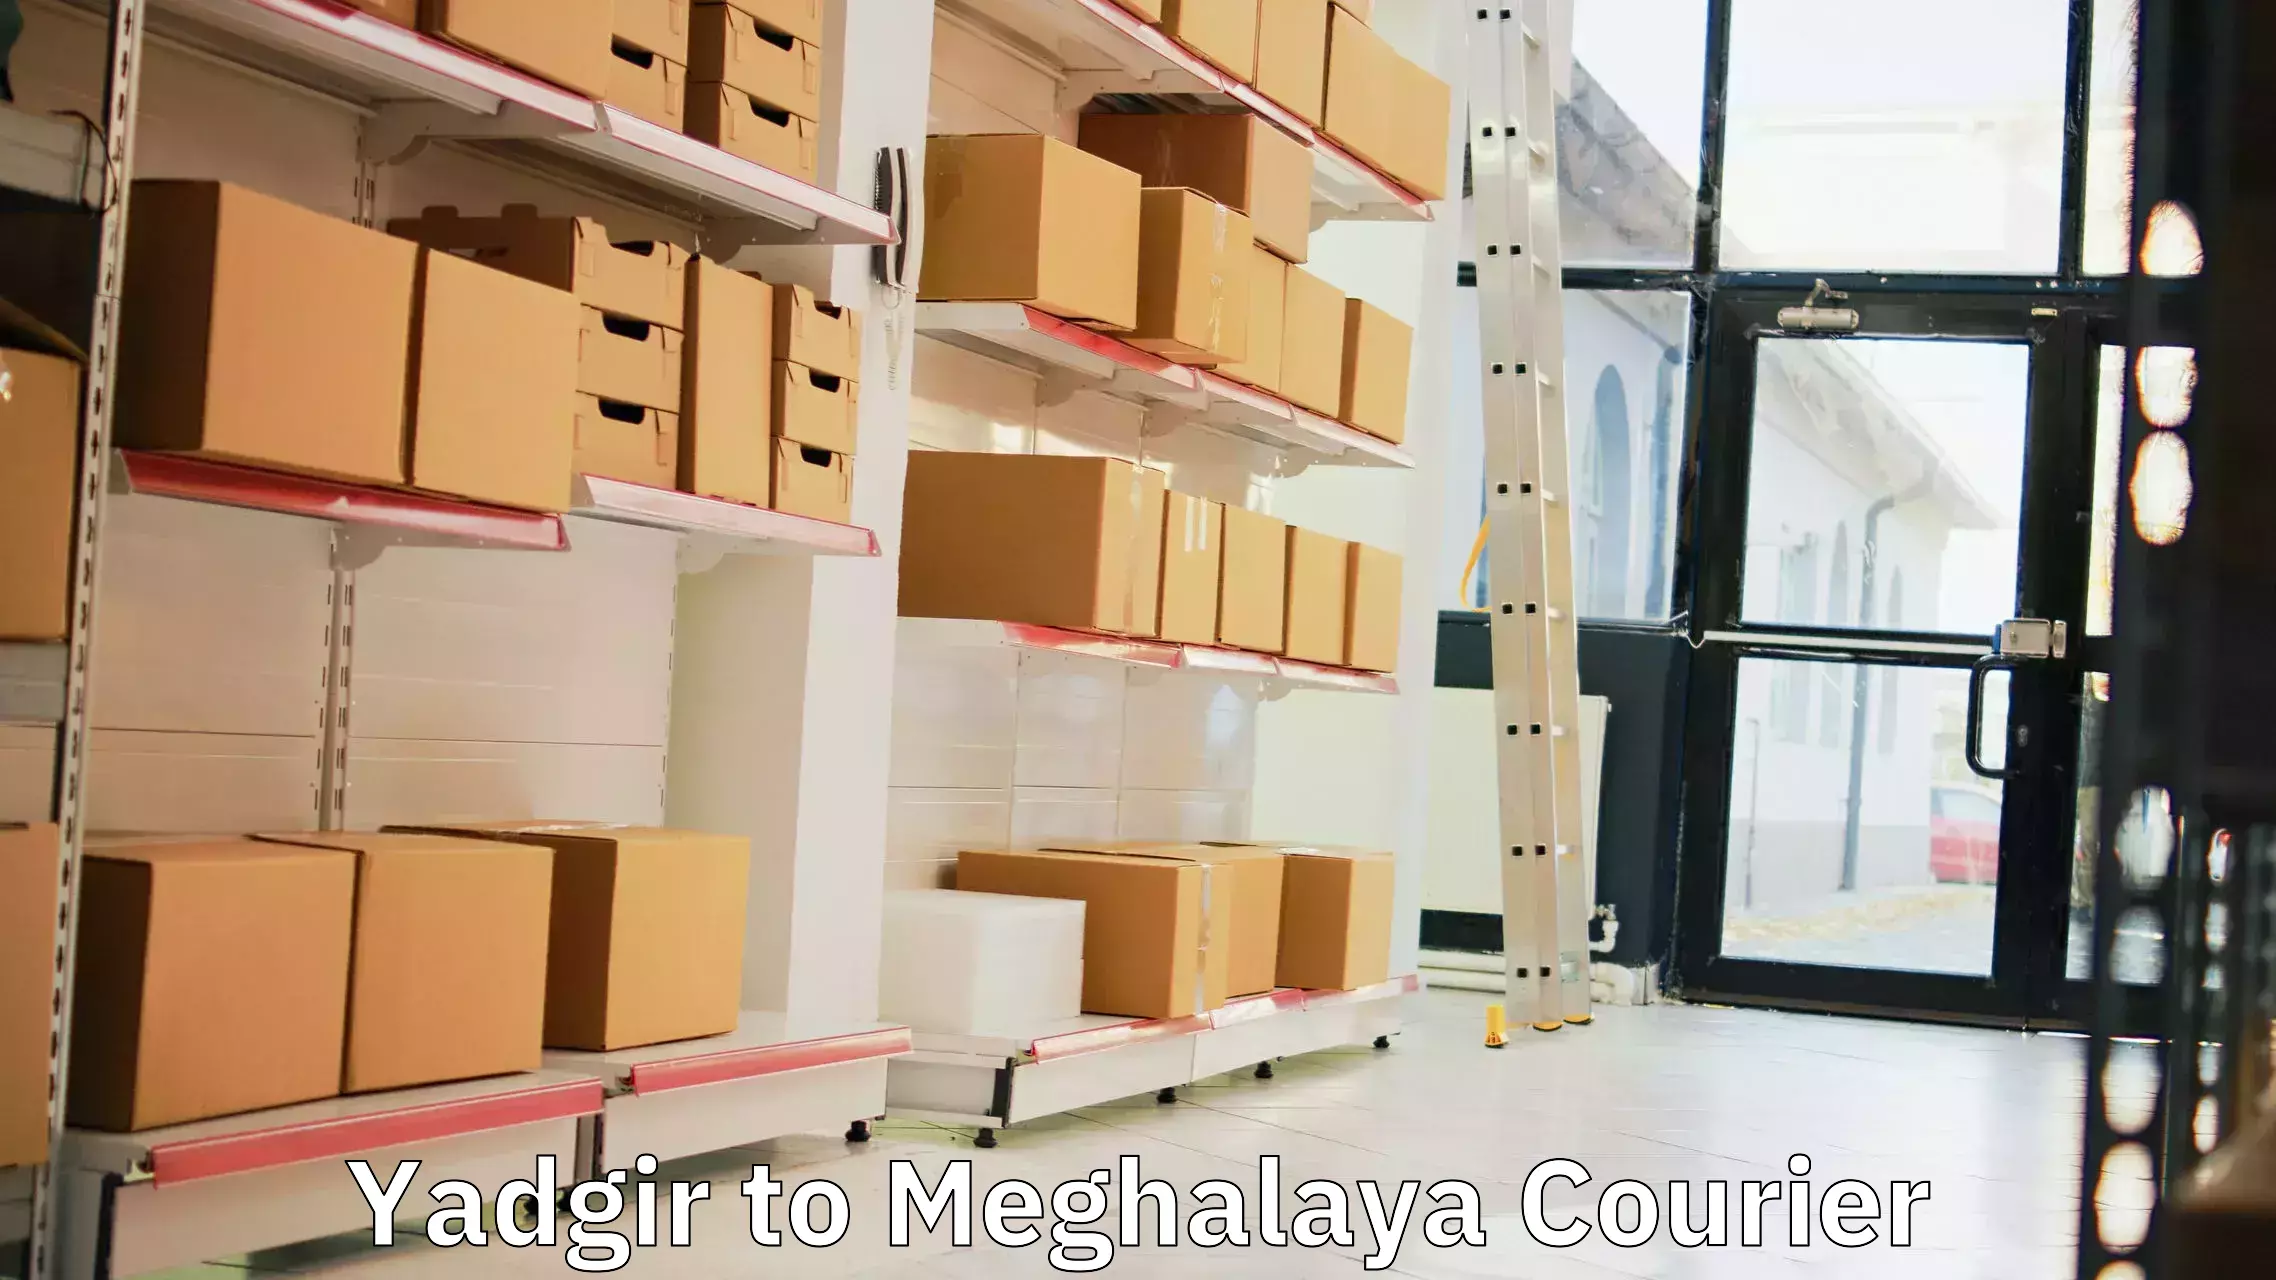 Postal and courier services Yadgir to Meghalaya